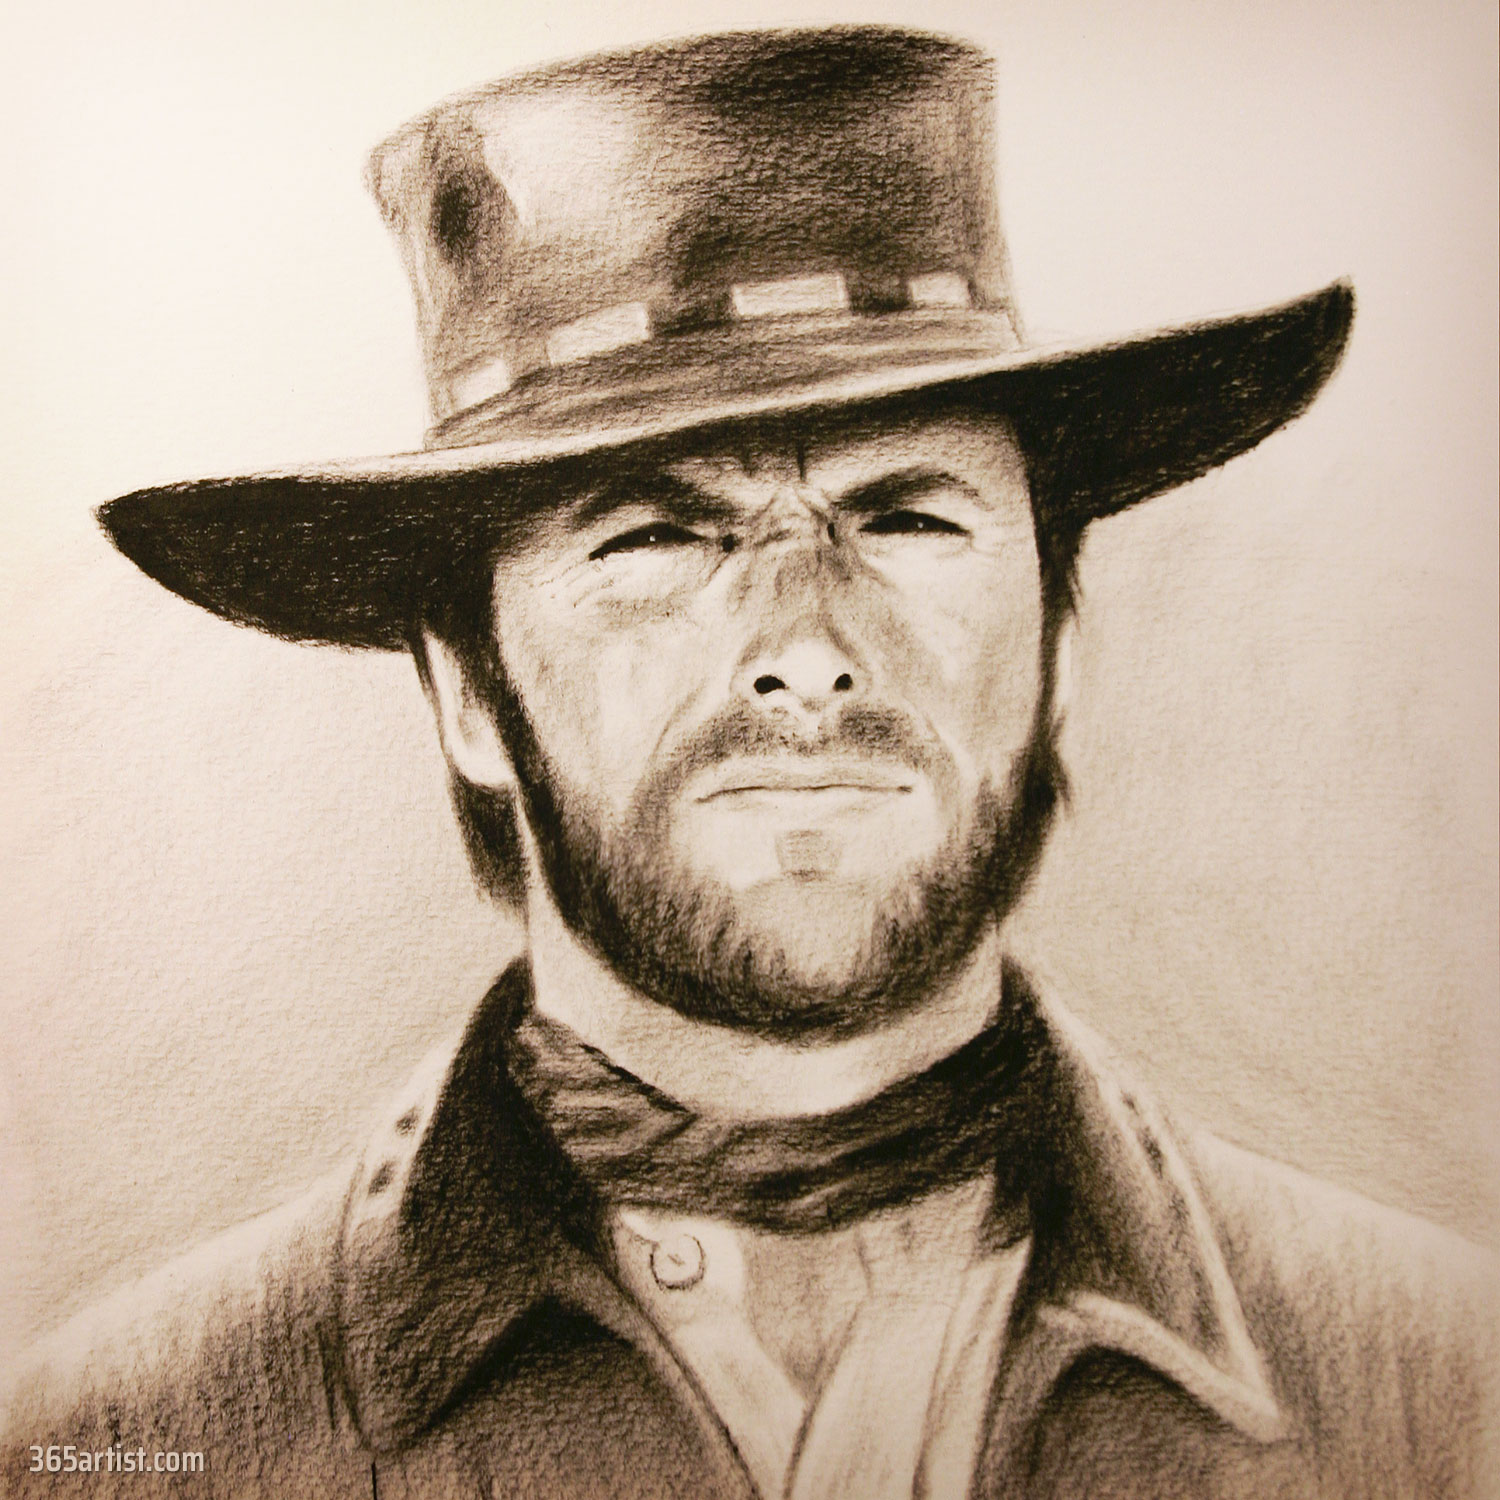 Clint Eastwood dry brush painting